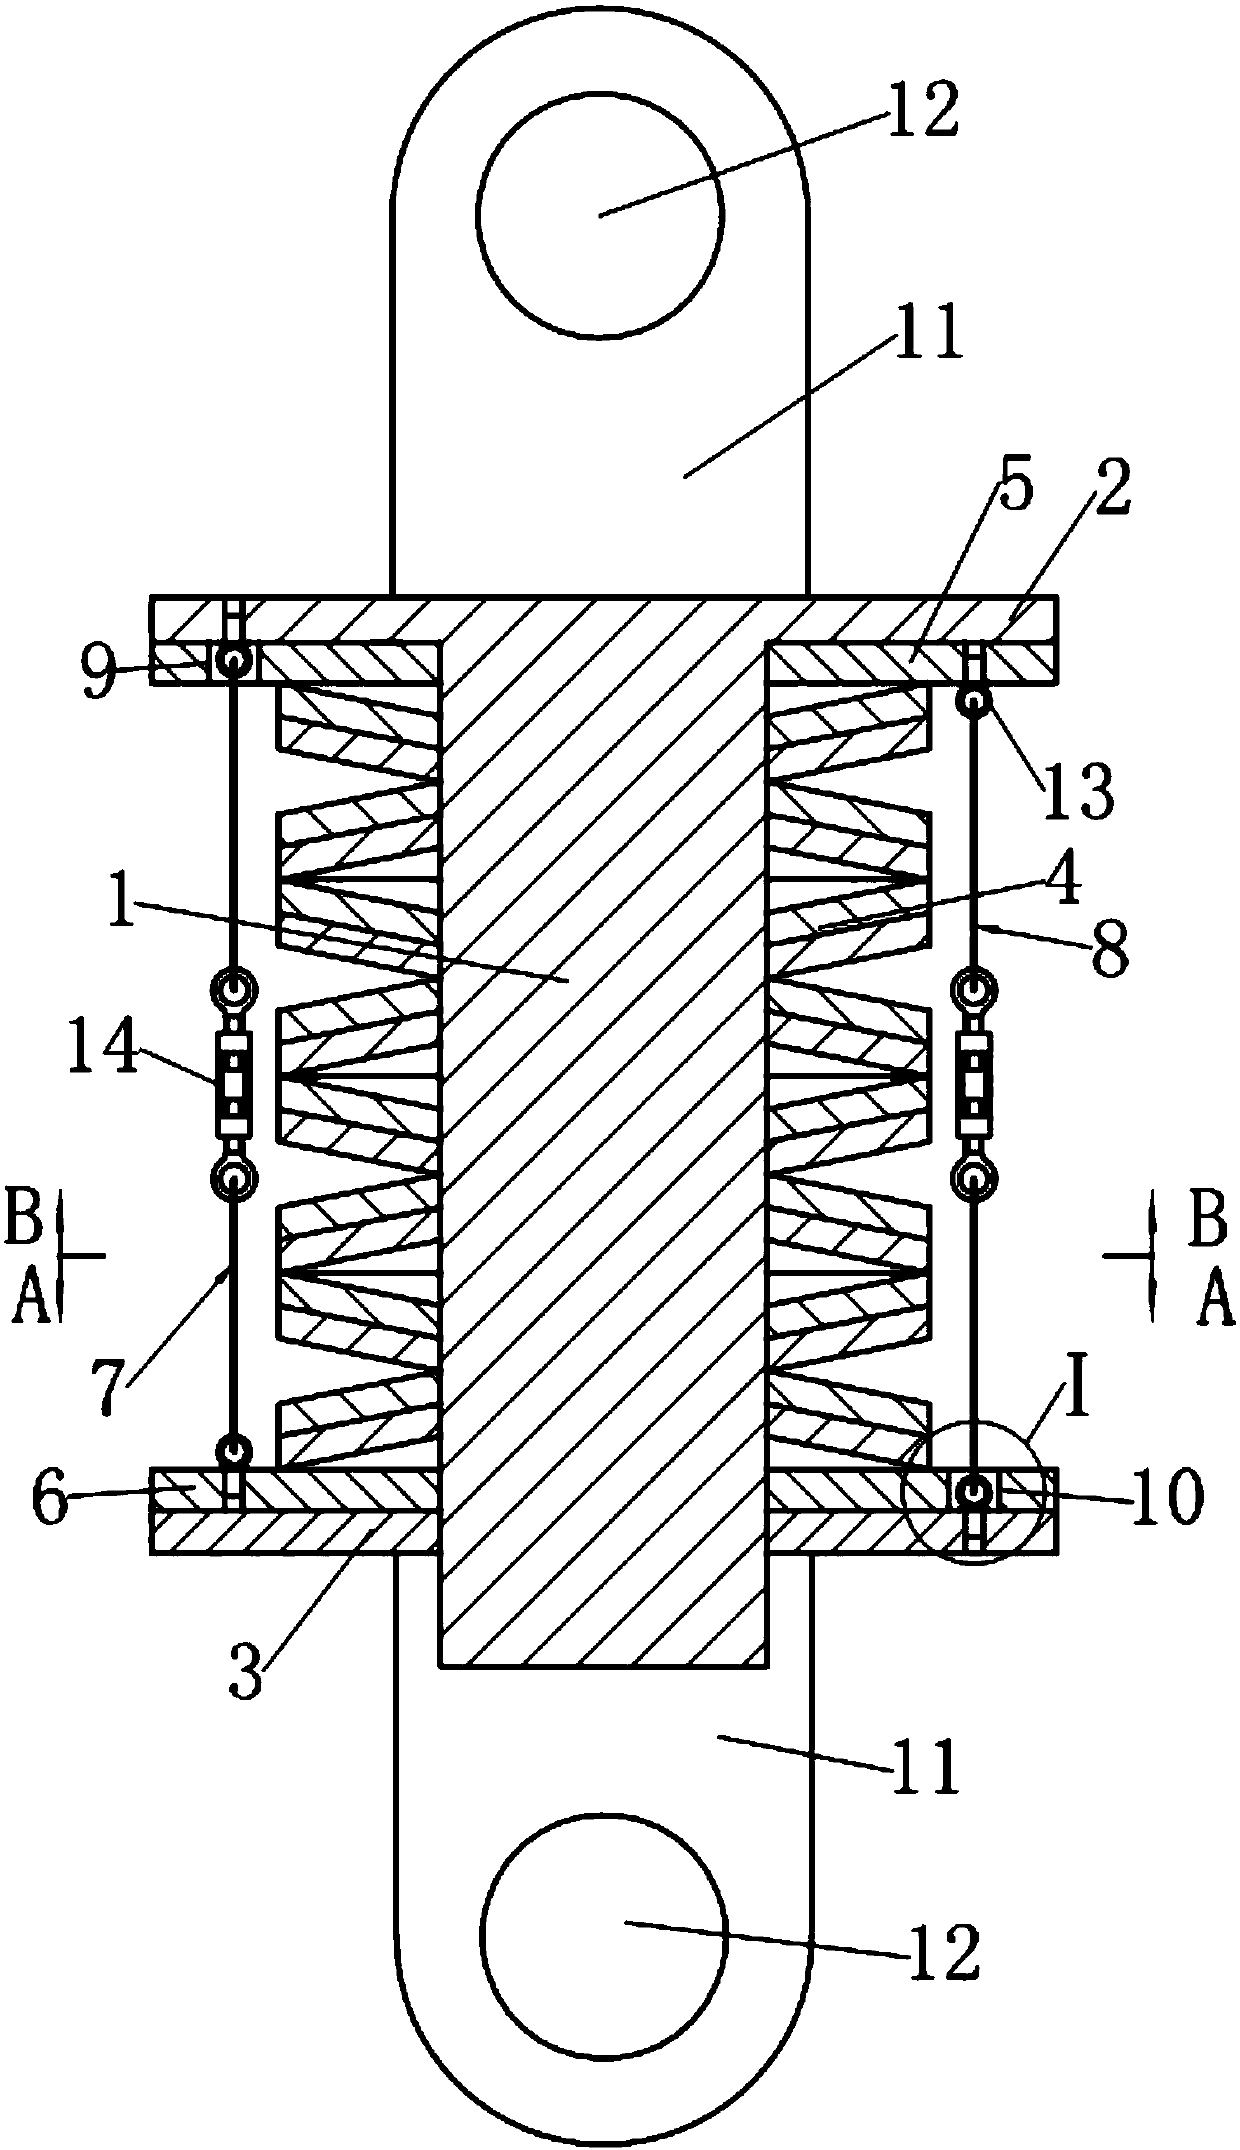 A disc spring damper capable of adjusting early stiffness